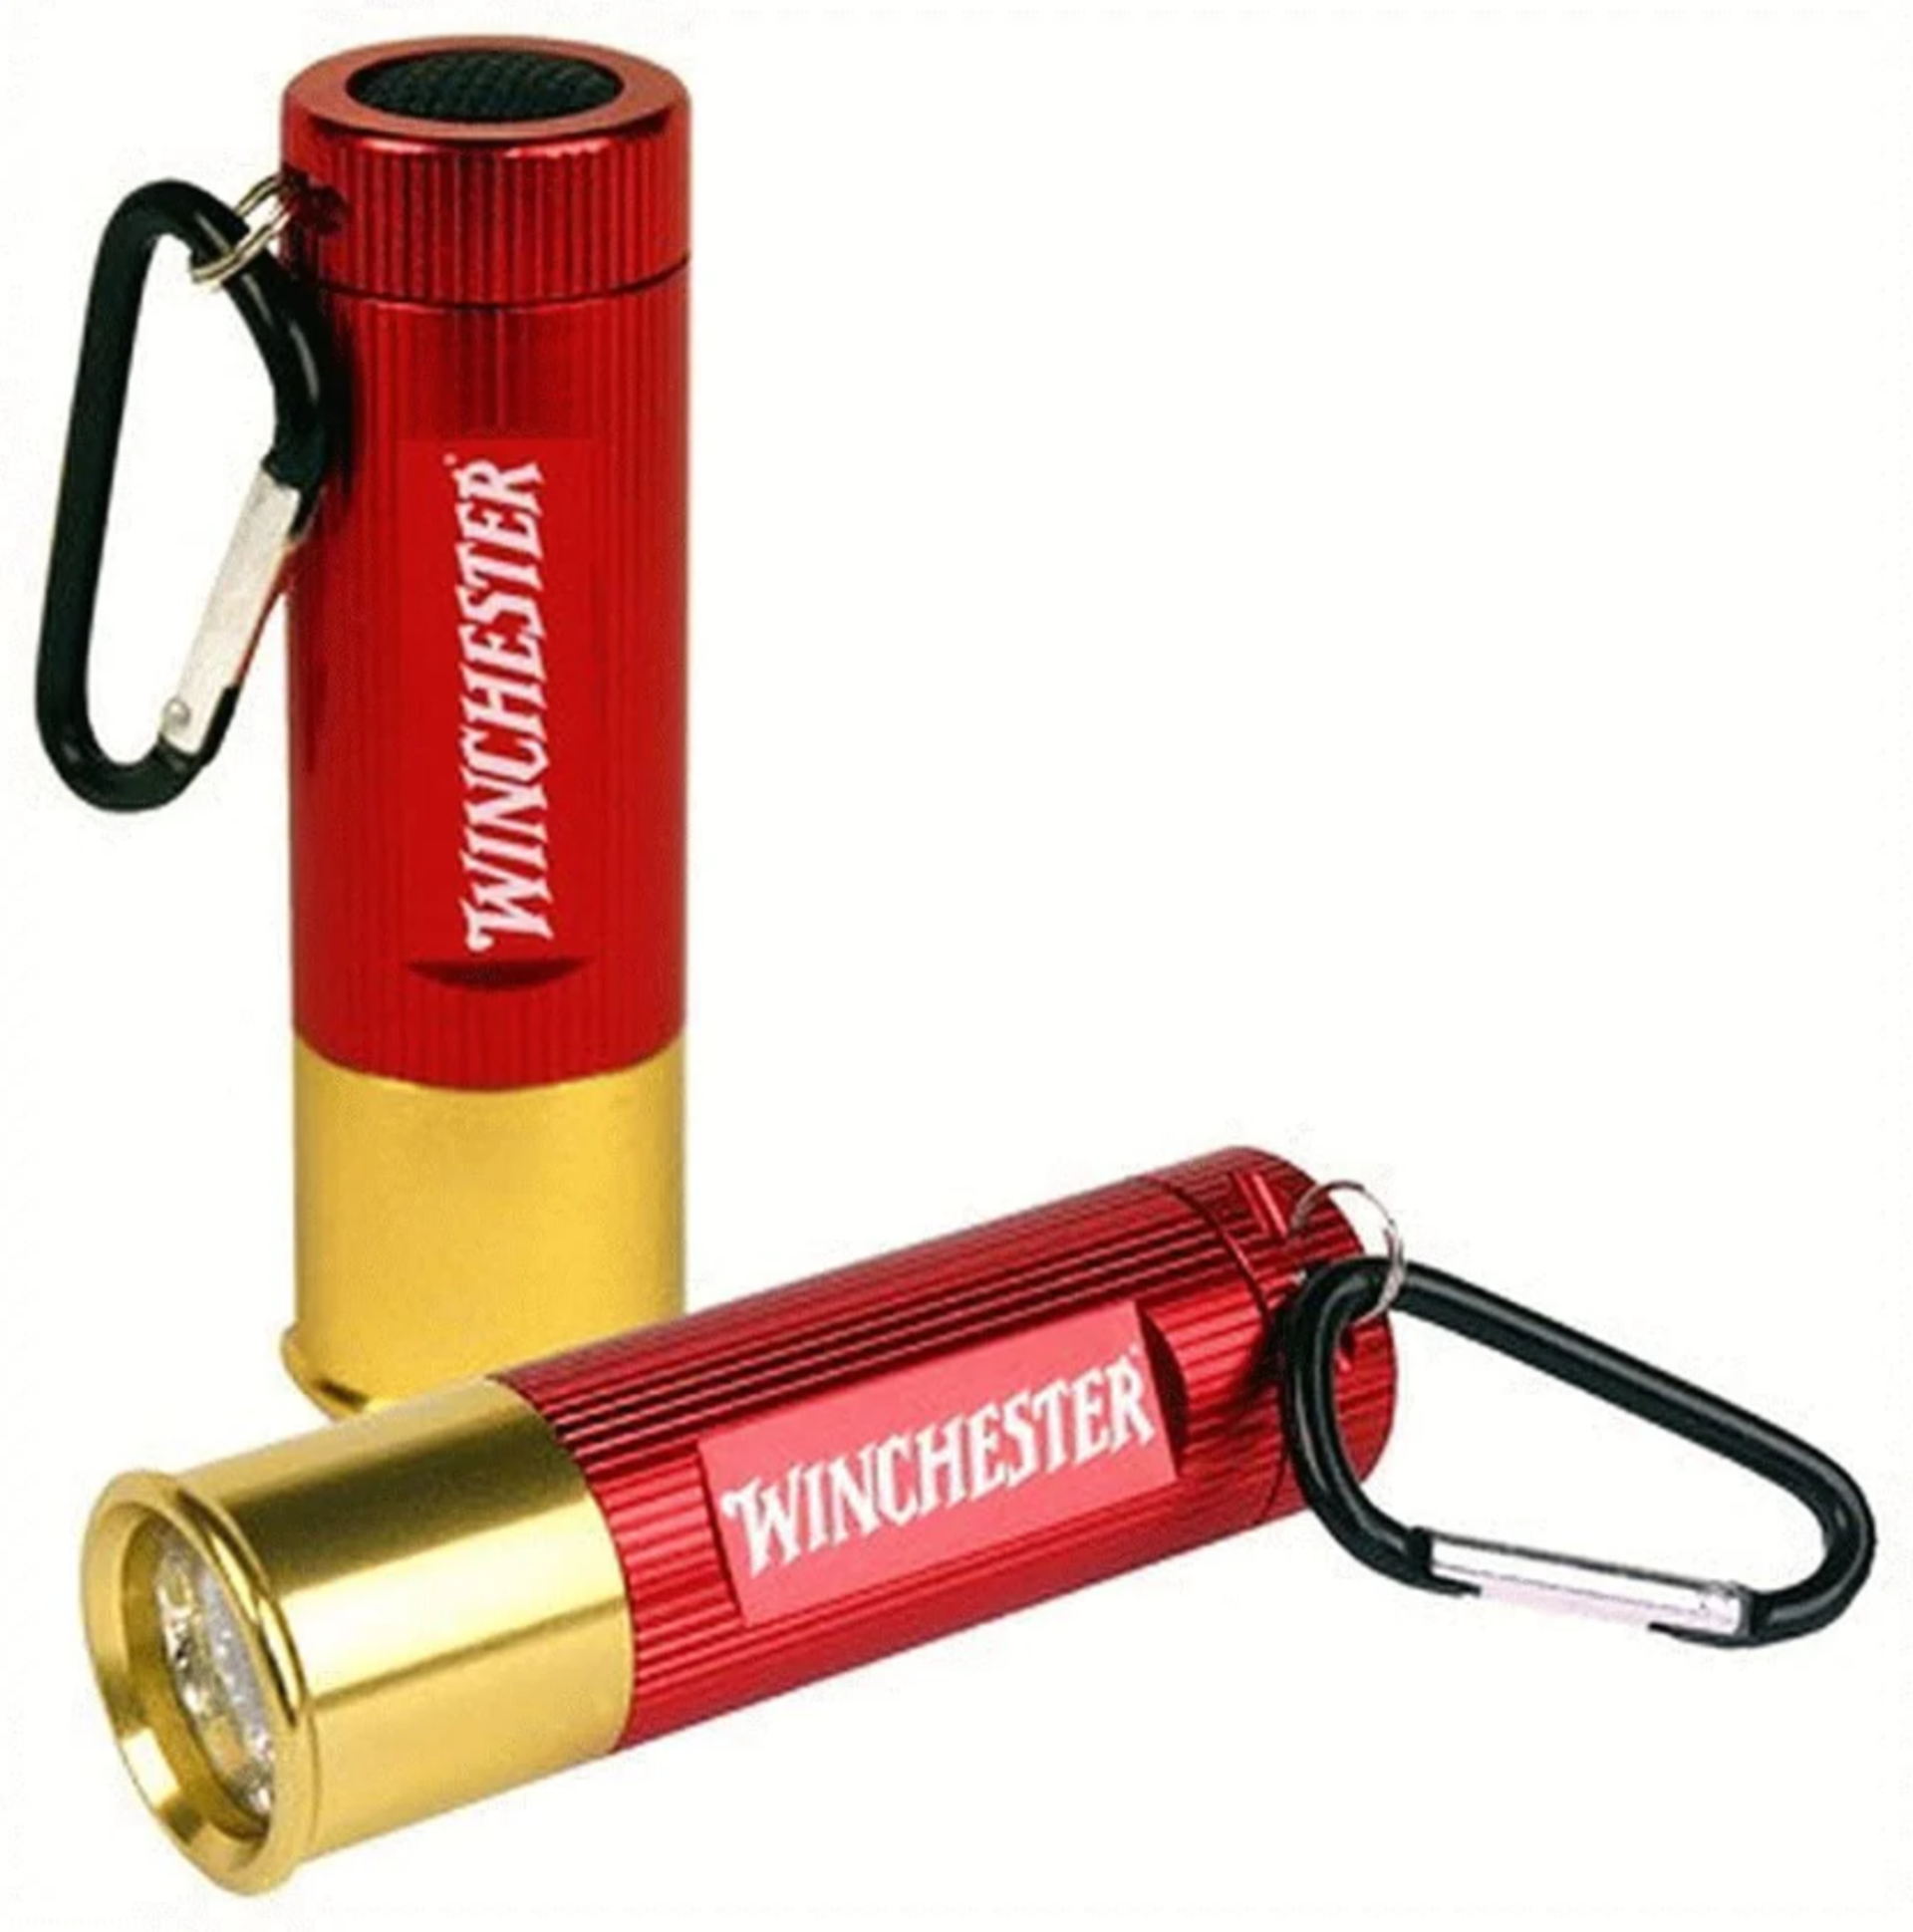 Rivers Edge Products Winchester Shot Shell 9 LED Flashlight